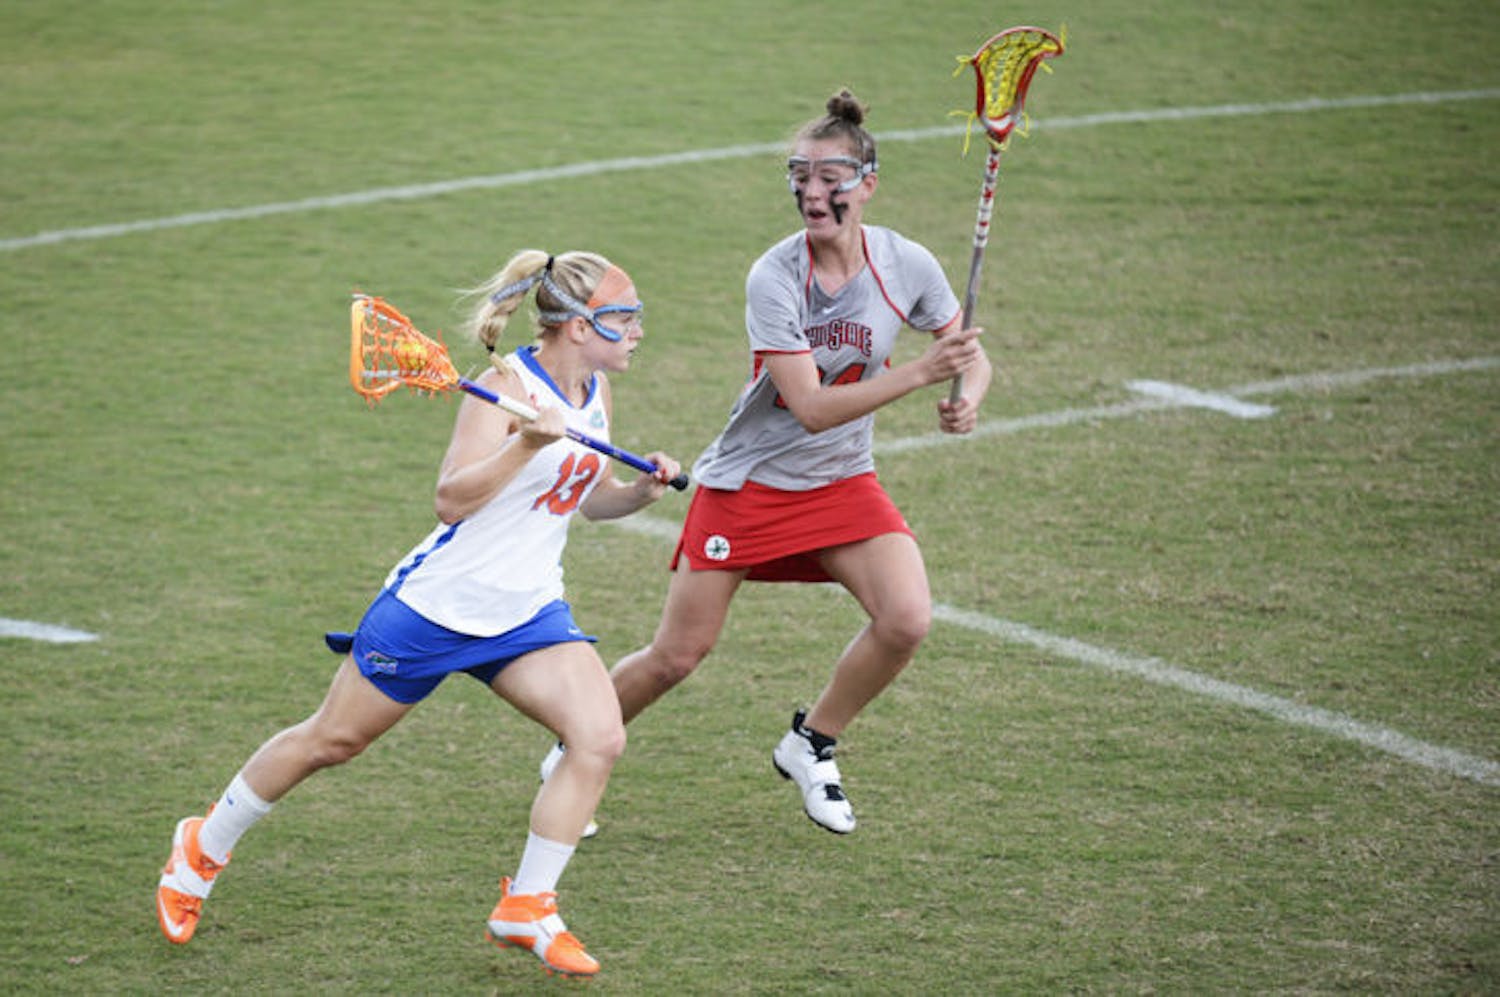 Florida’s Ashley Bruns (13) attacks the net against Ohio State defender Tayler Kuzma (24) in the Gators’ 13-7 win against the Buckeyes on March 23 at Dizney Stadium. Northwestern held Bruns to one goal in Florida's 8-3 loss on Sunday.